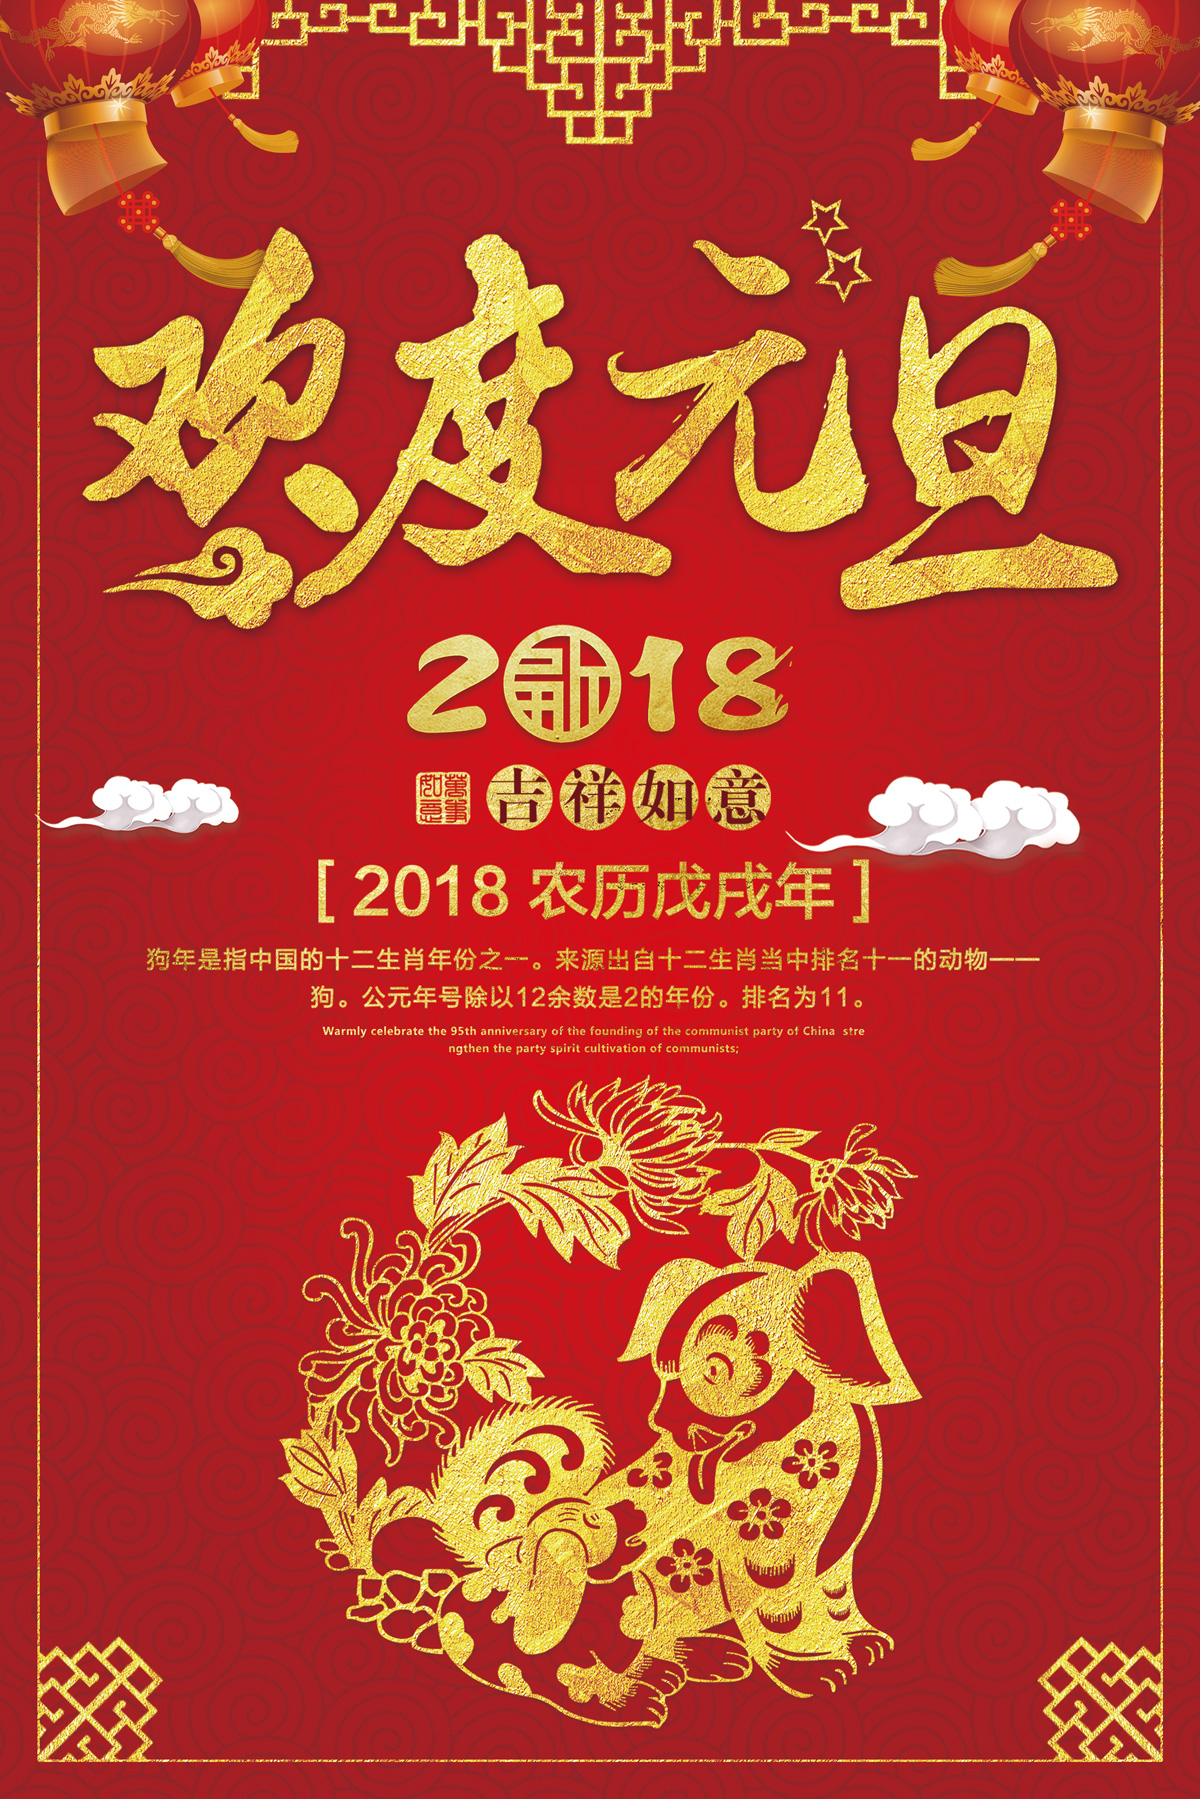 2018 New Year's Day celebration poster design